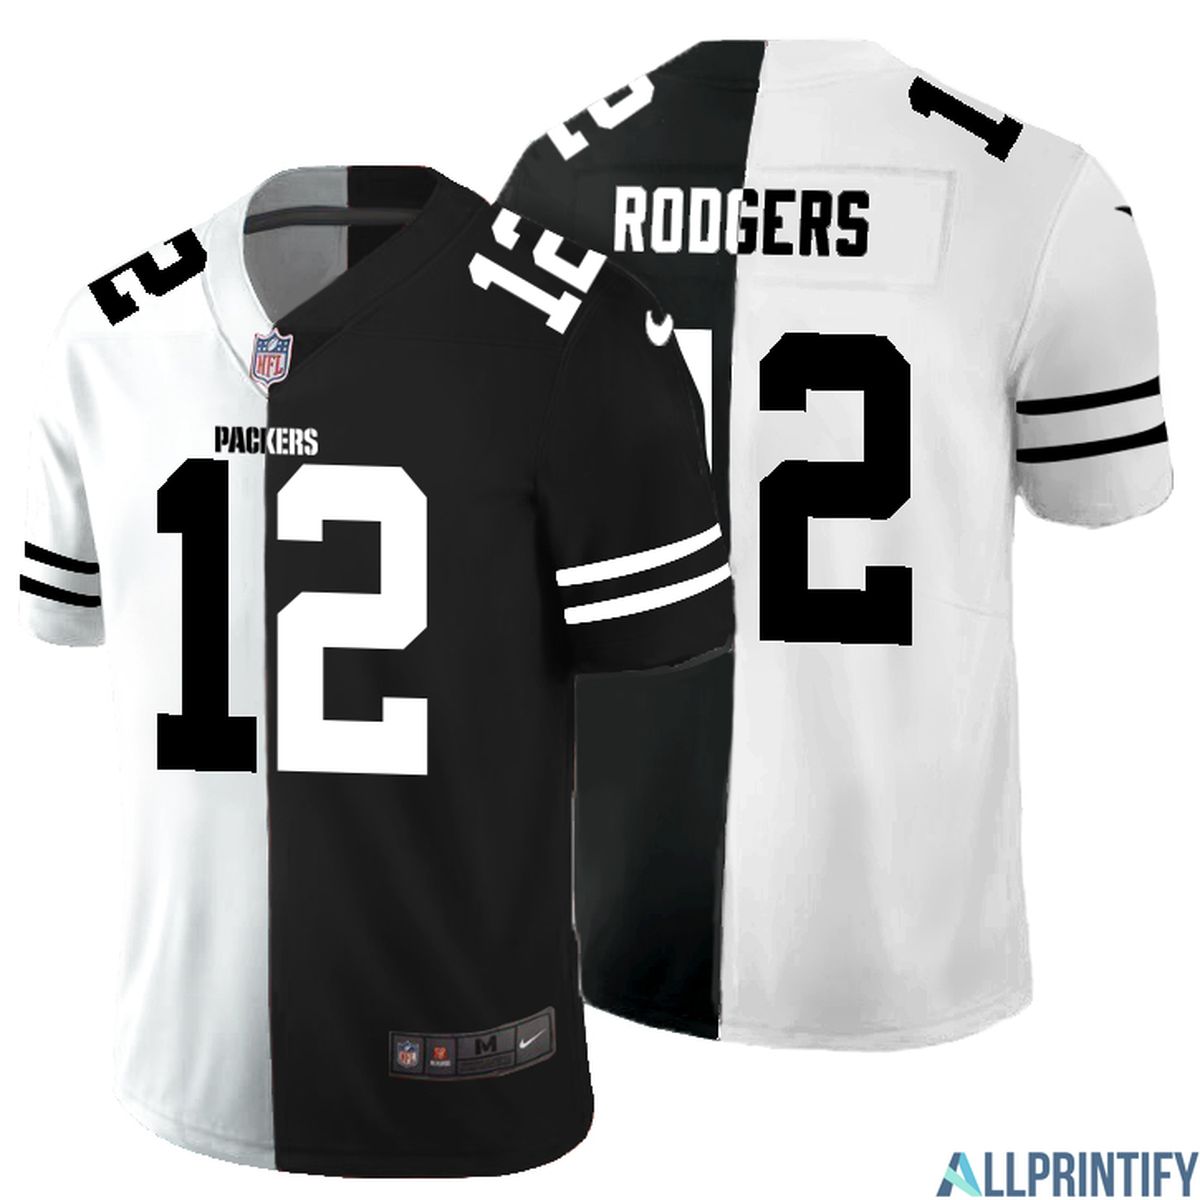 Aaron Rodgers Green Bay Packers 12 Black And White Vapor Limited Jersey